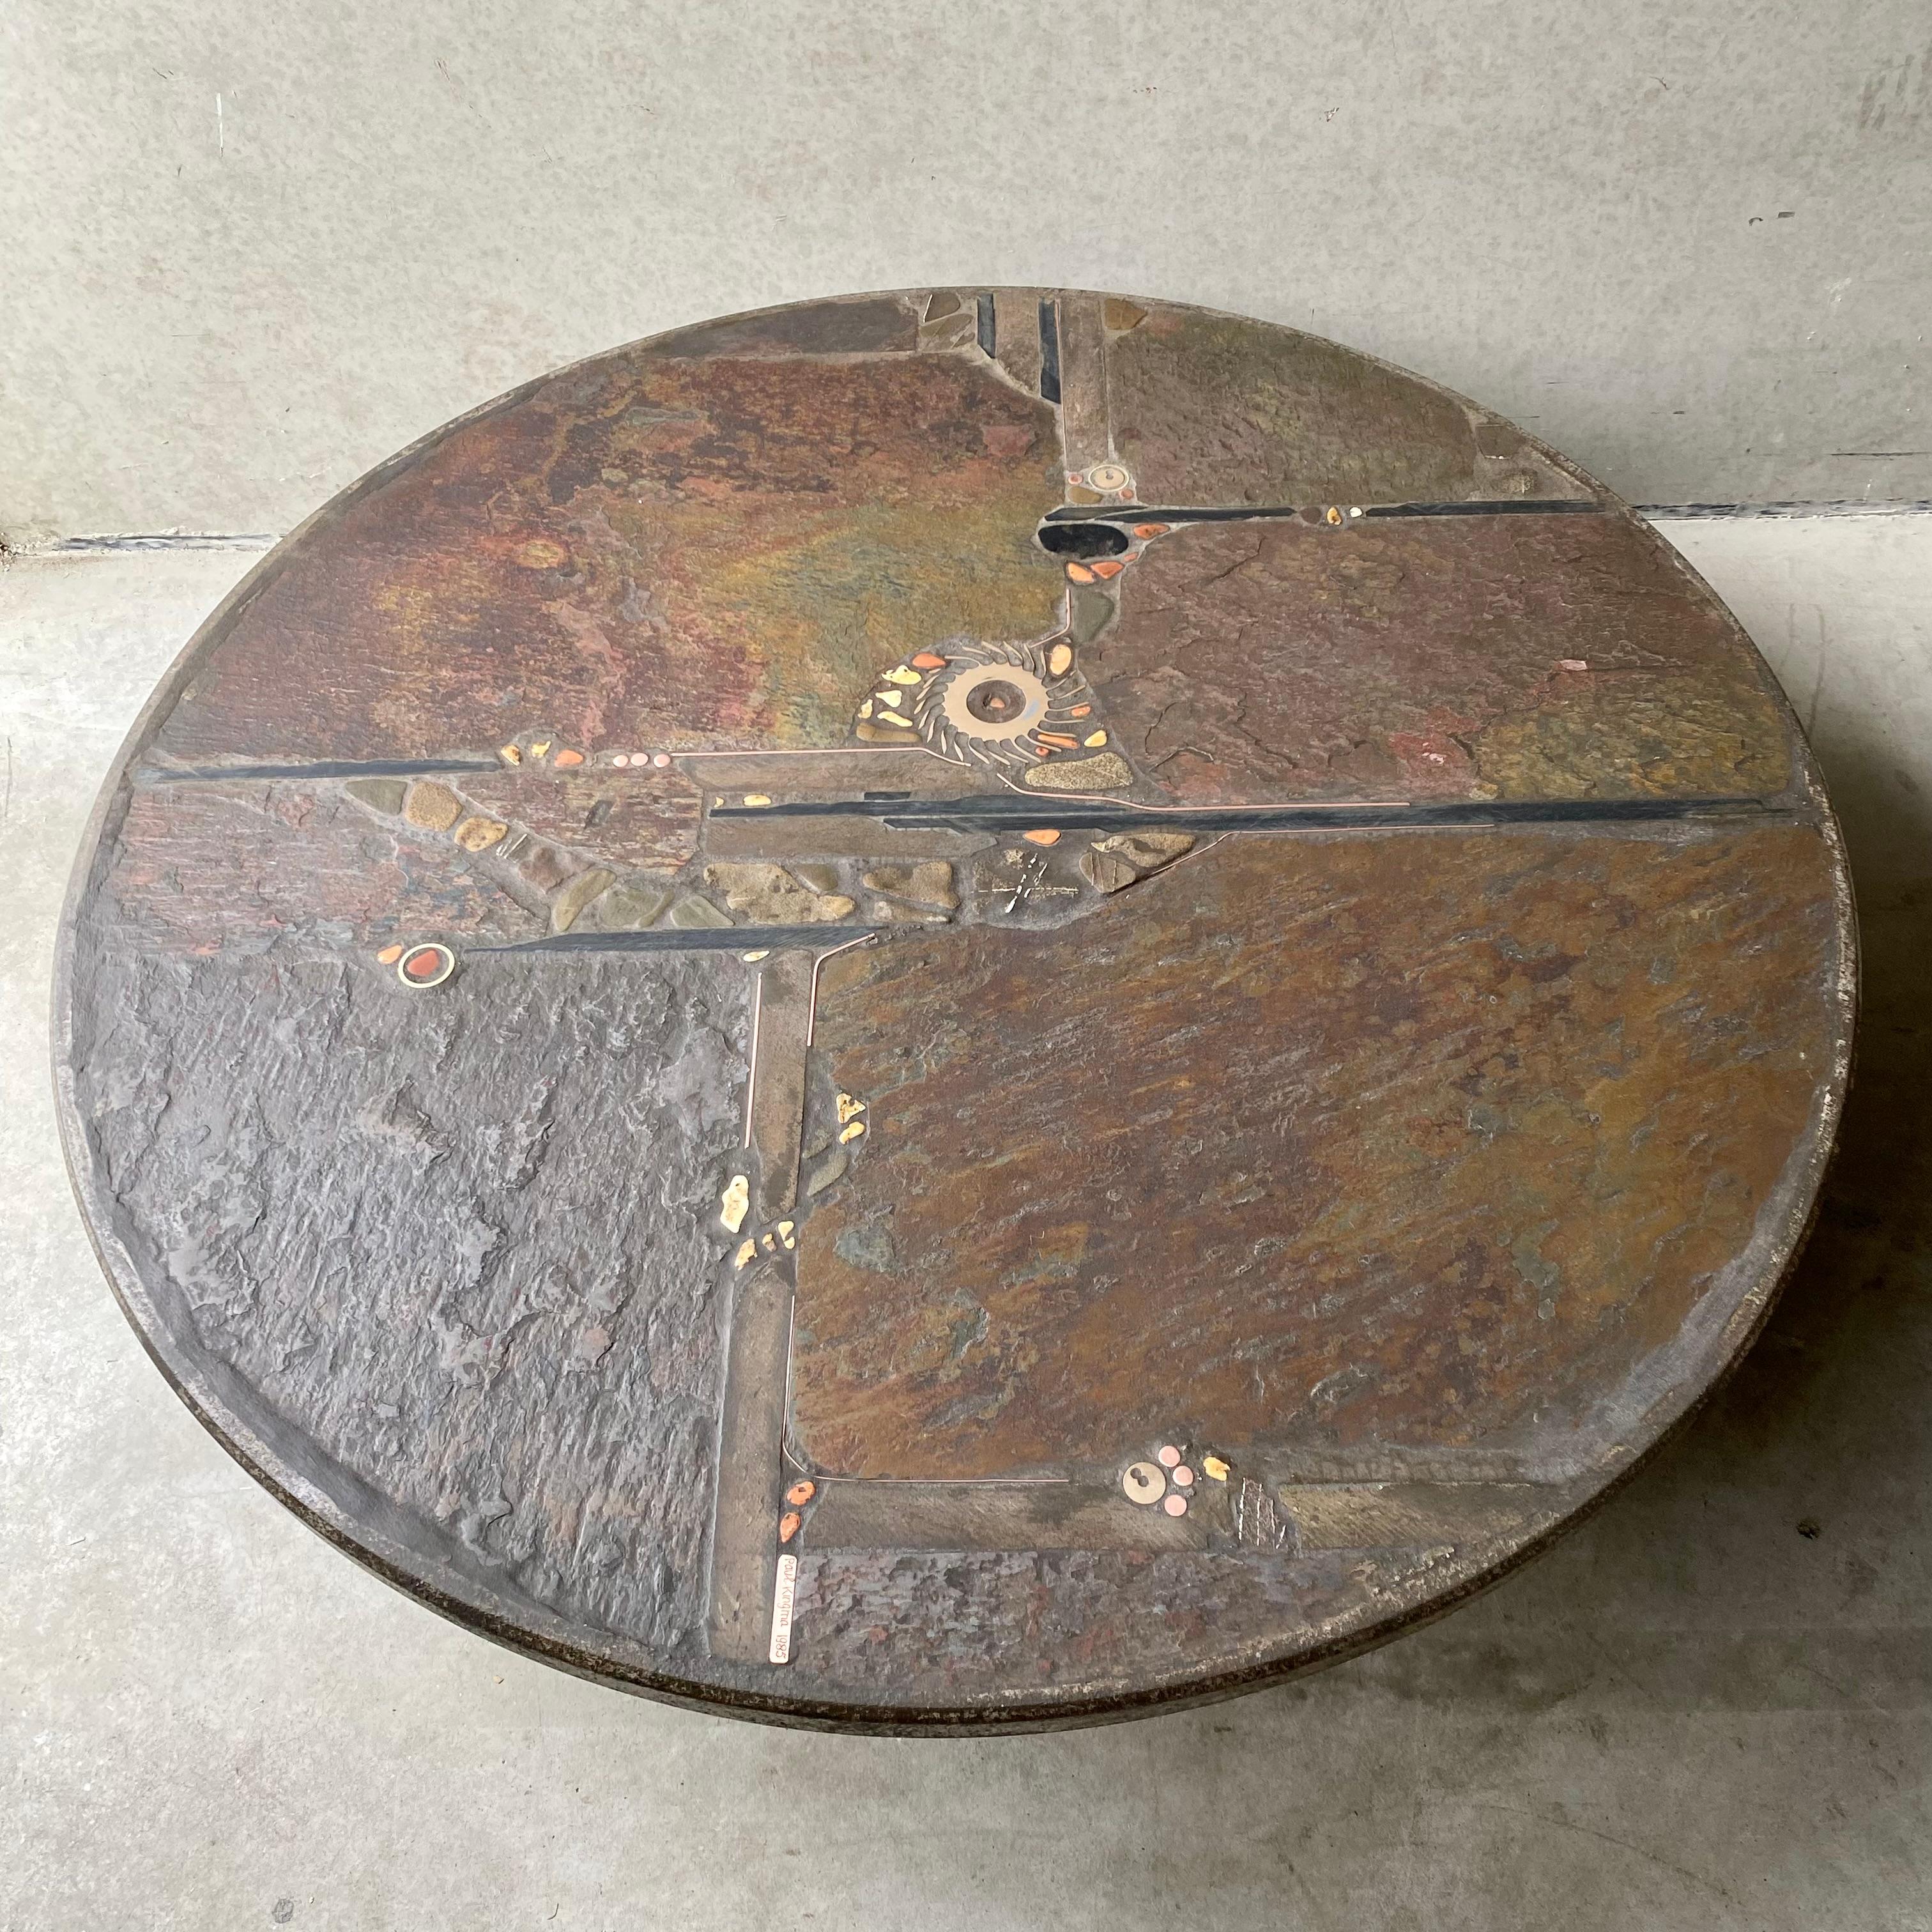 Brutalist Art Stone Round Coffee Table by Sculptor Paul Kingma Netherlands, 1985 For Sale 2